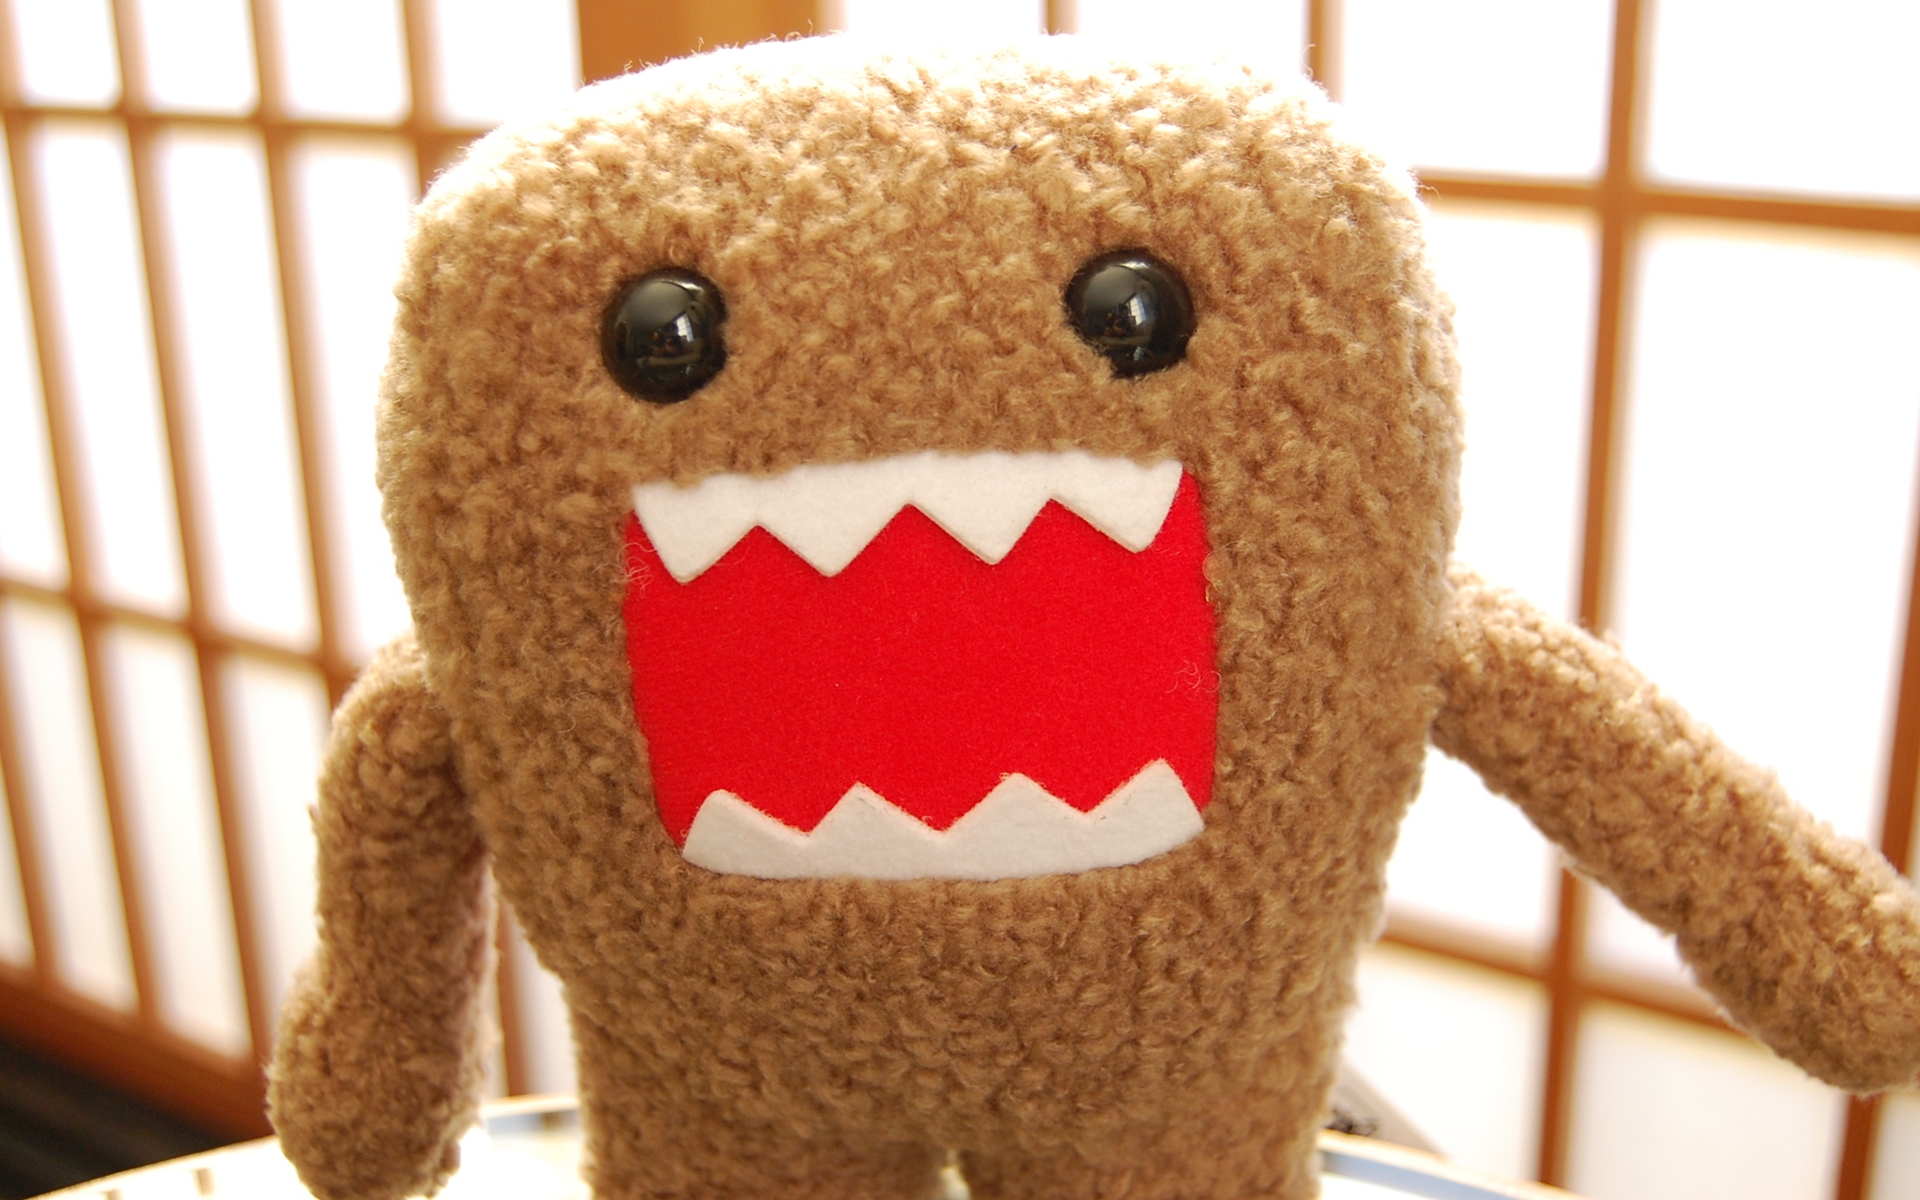 You Are Ing Domo HD Wallpaper Color Palette Tags Category